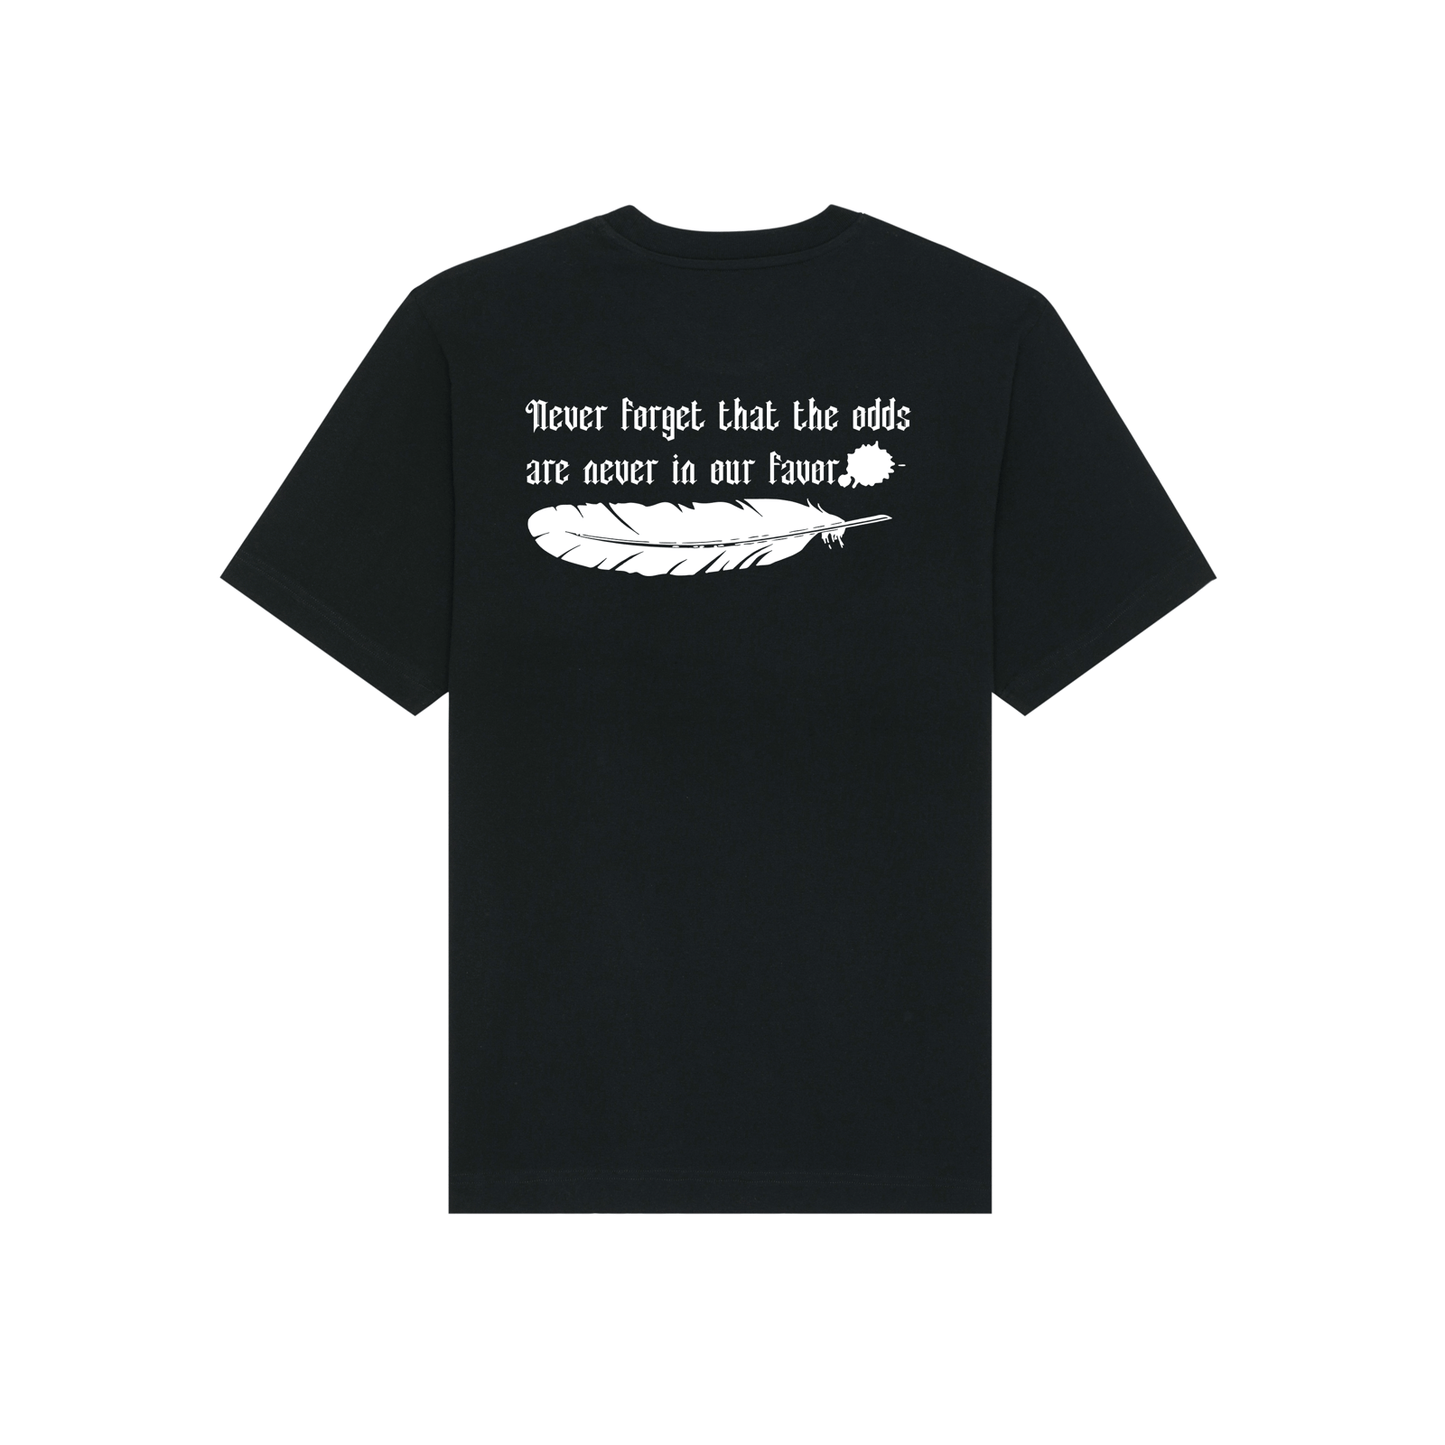 S?LD OUT - ODDS TEE